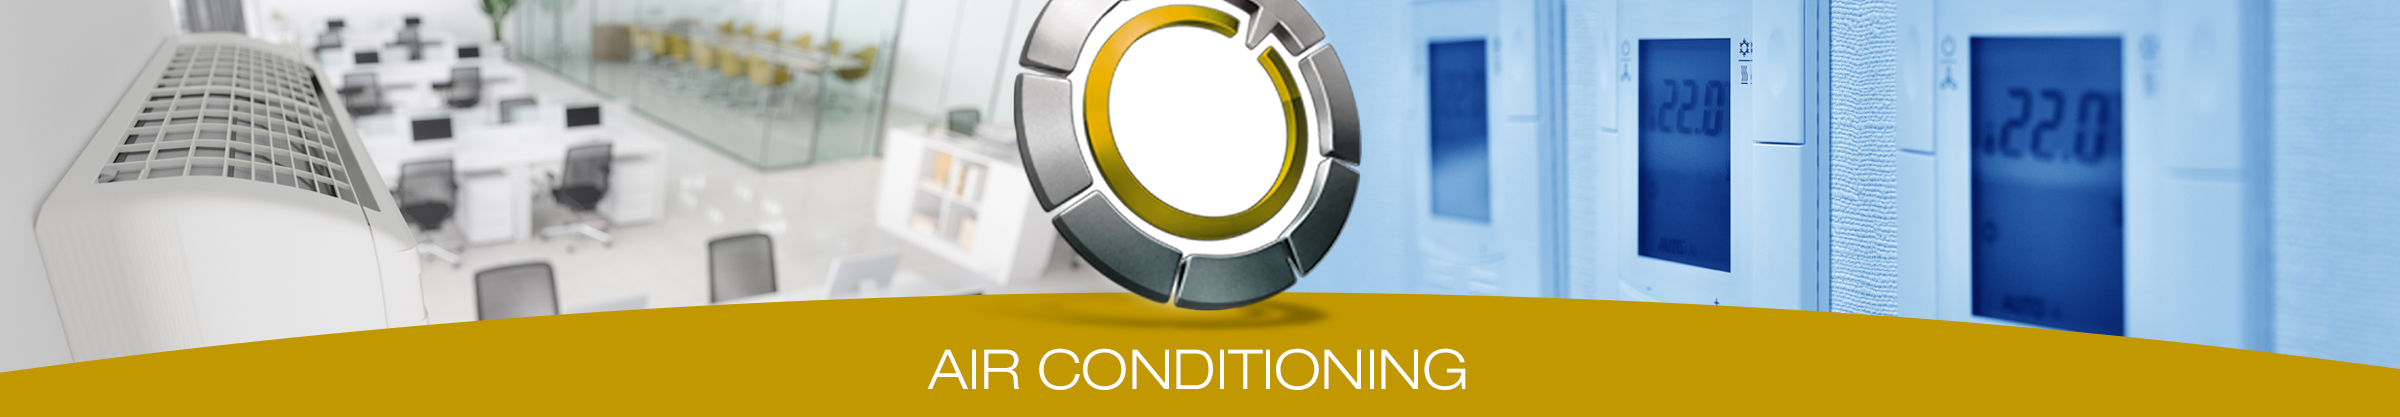 Stator Air Conditioning